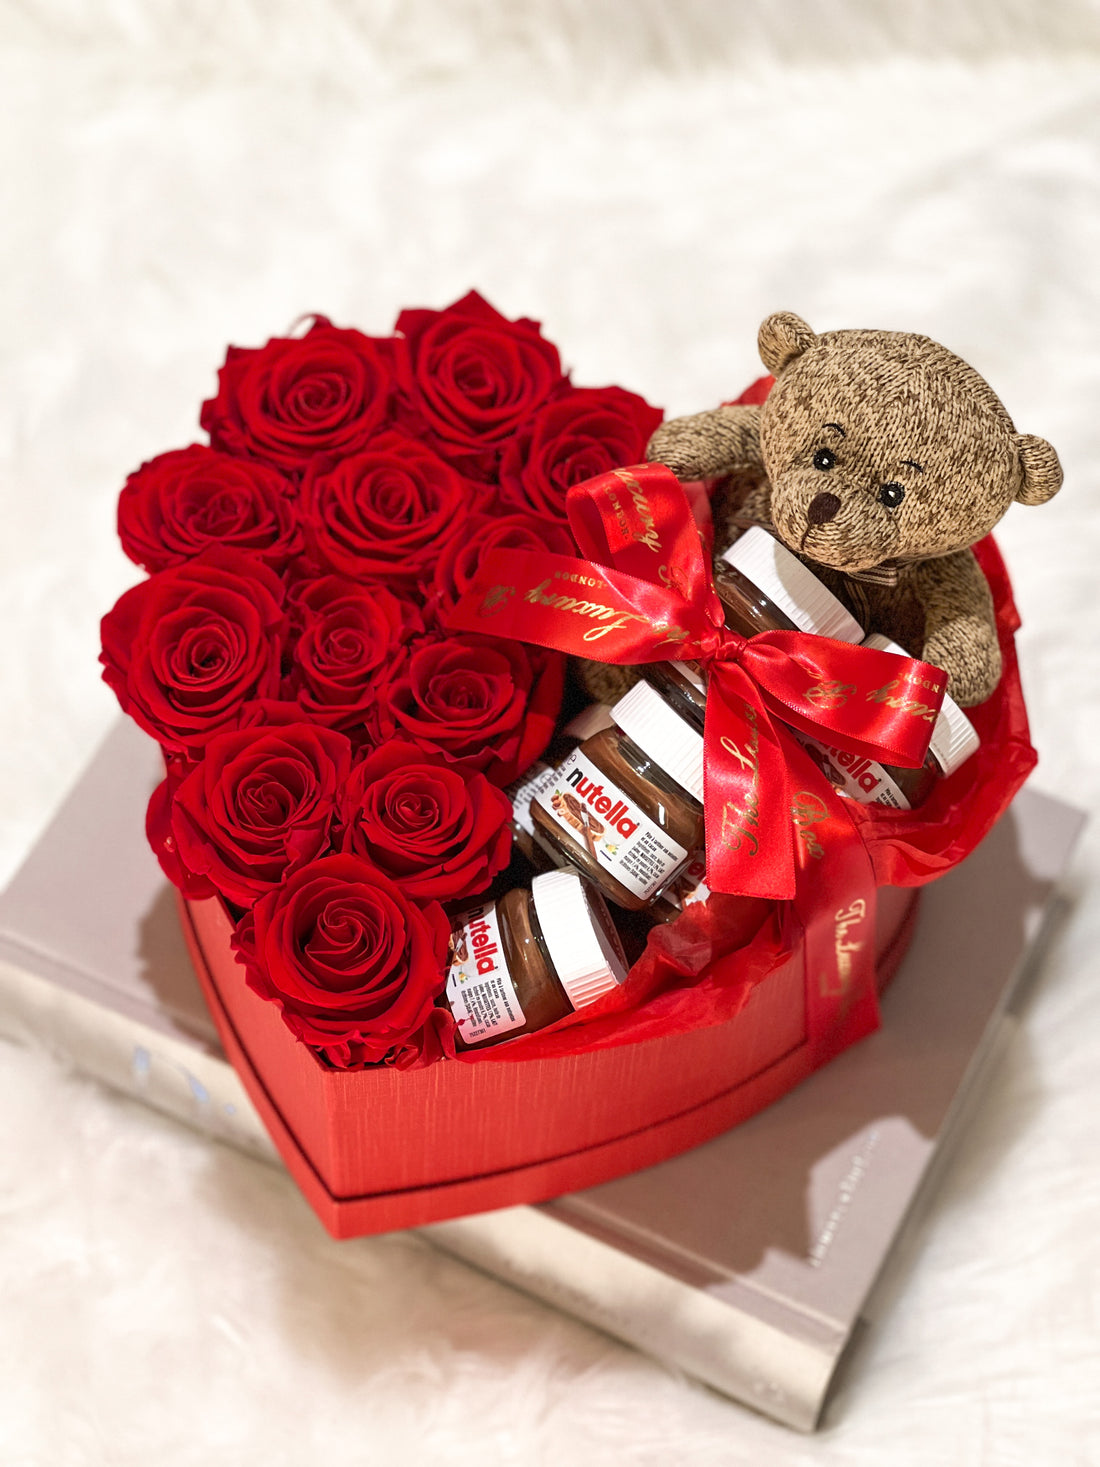 Preserved eternity roses and nutella gift set in heart shaped box